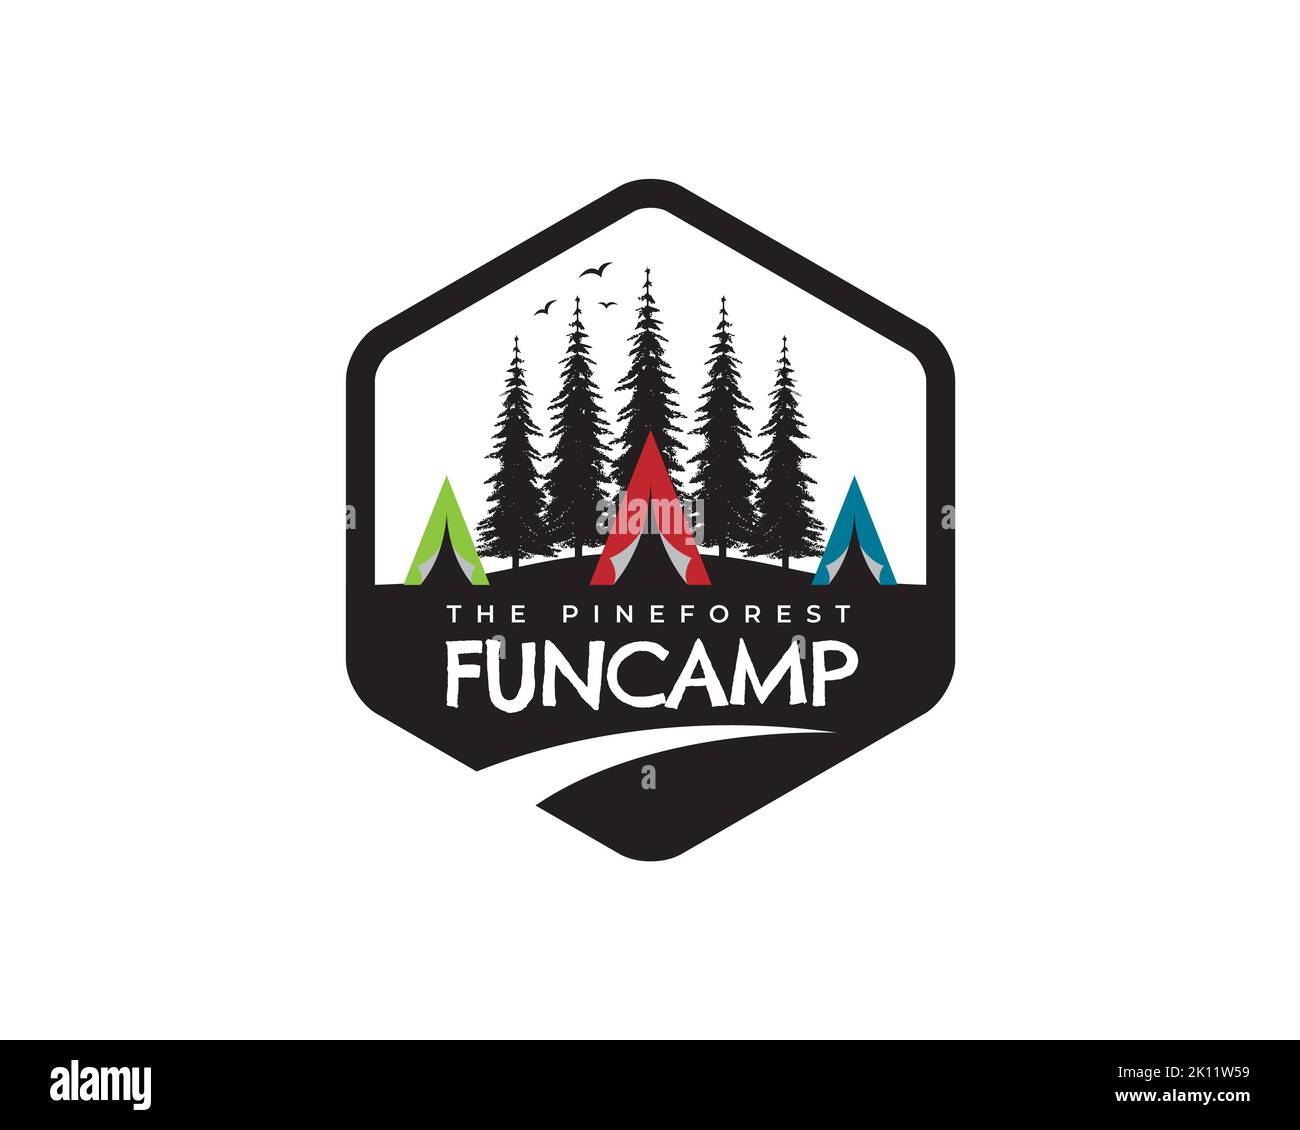 coniferous forest, mountains and wooden logo. Fun camping and wild nature. landscapes with pine trees and hills. Stock Vector